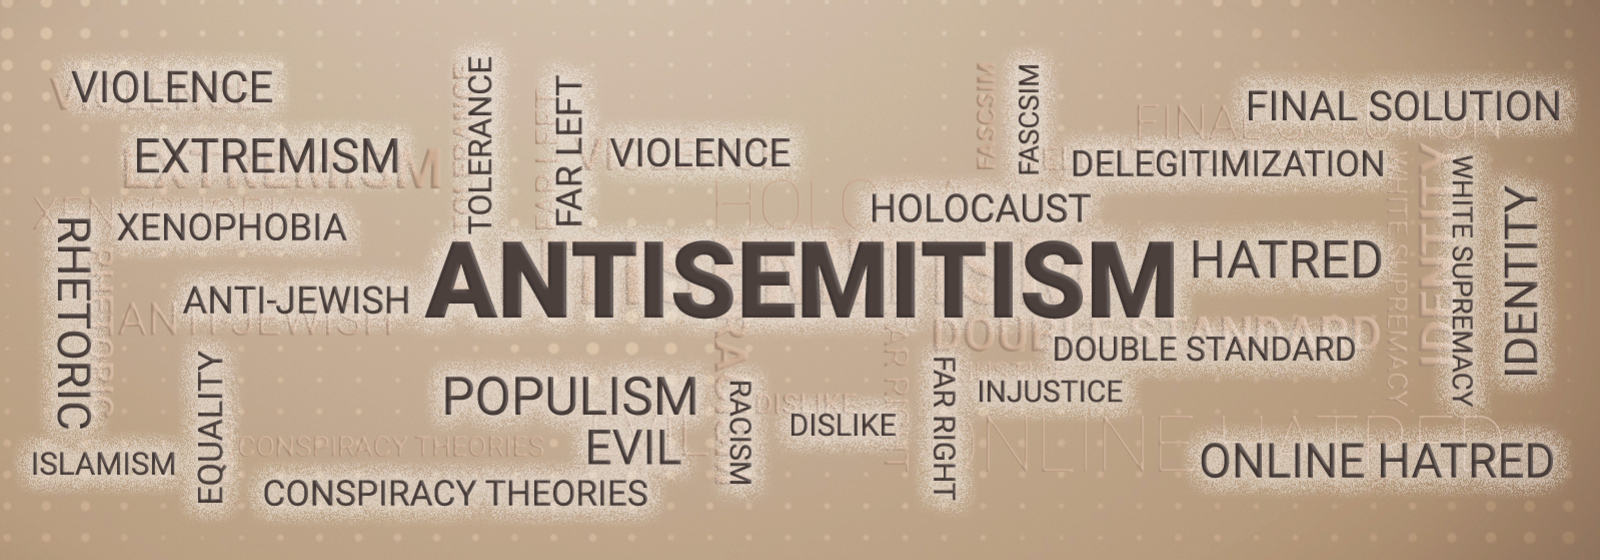 "Antisemitism: From Its Origins to the Present" - Free Online Course Features Experts from Around the World